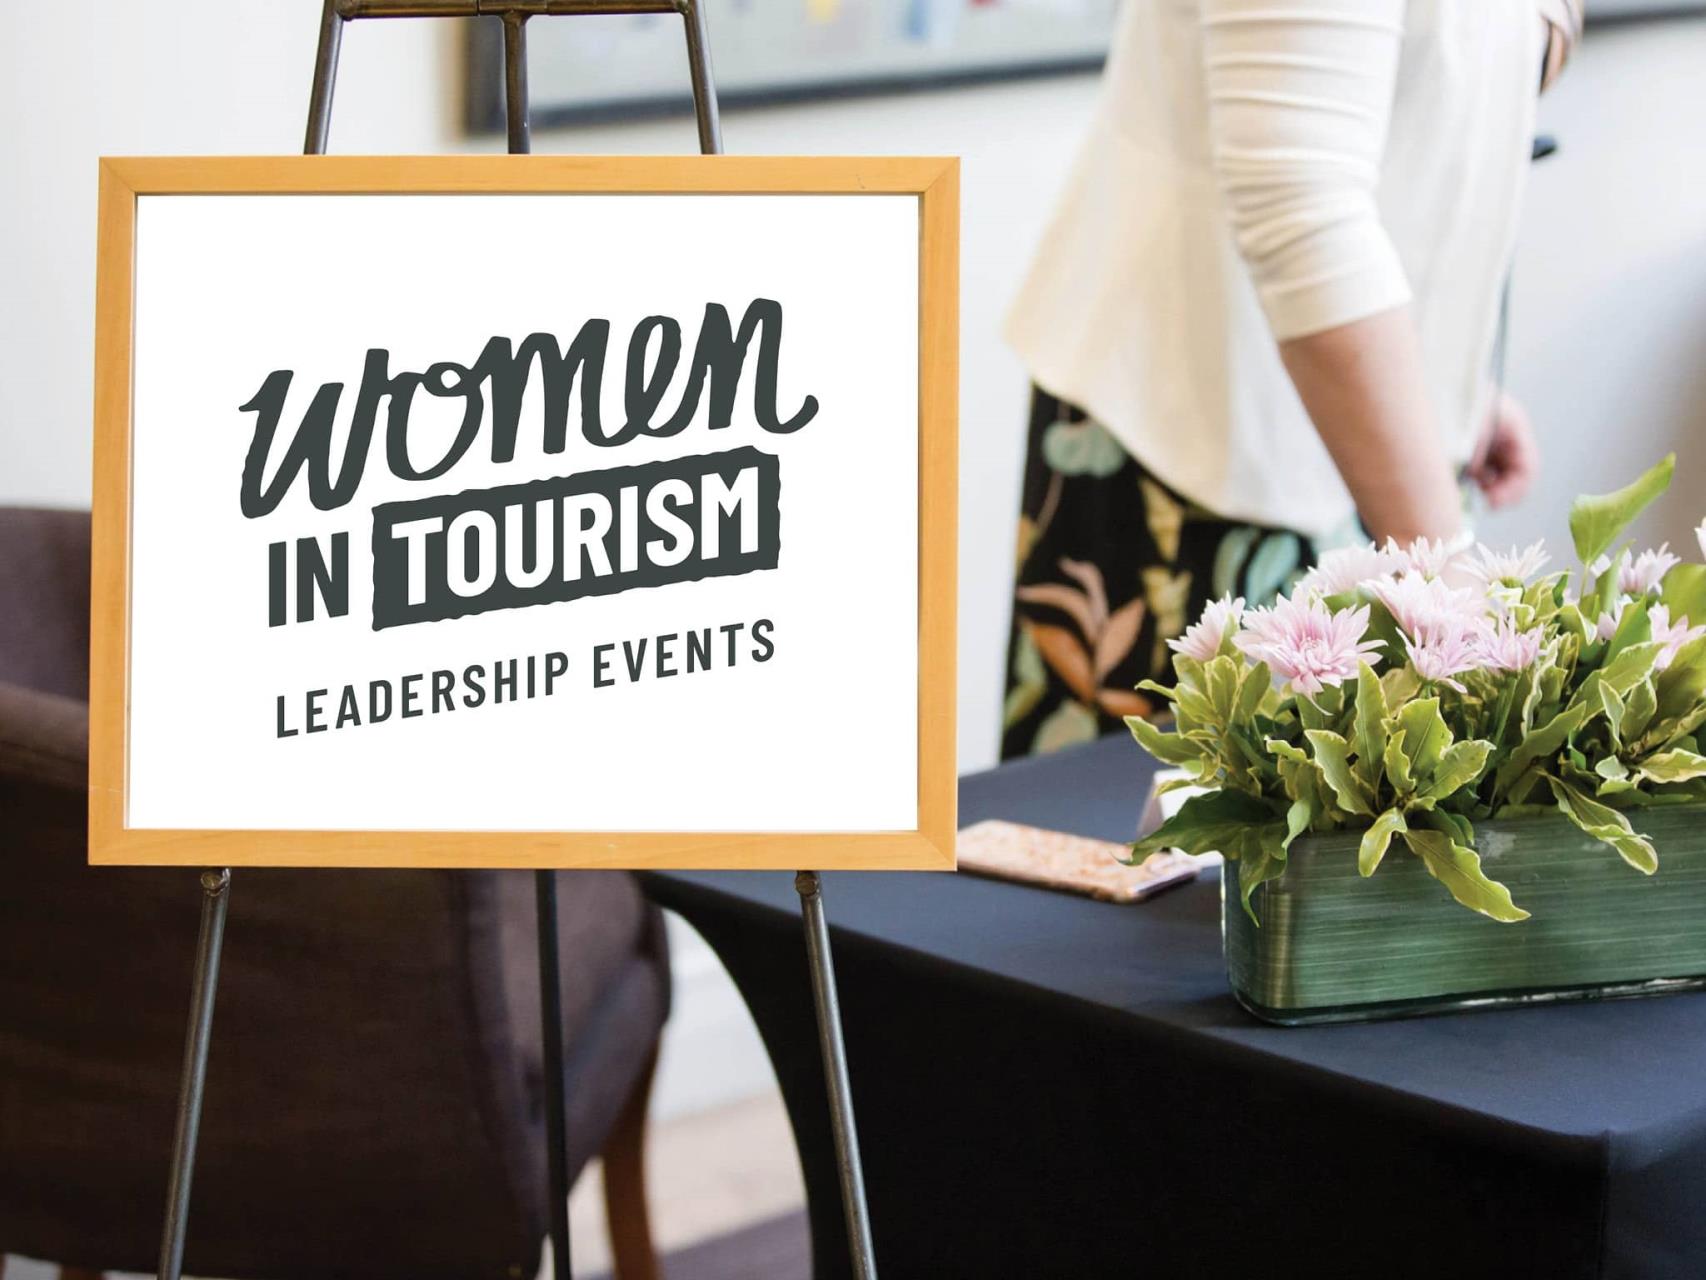 Women in Tourism - Leadership Events